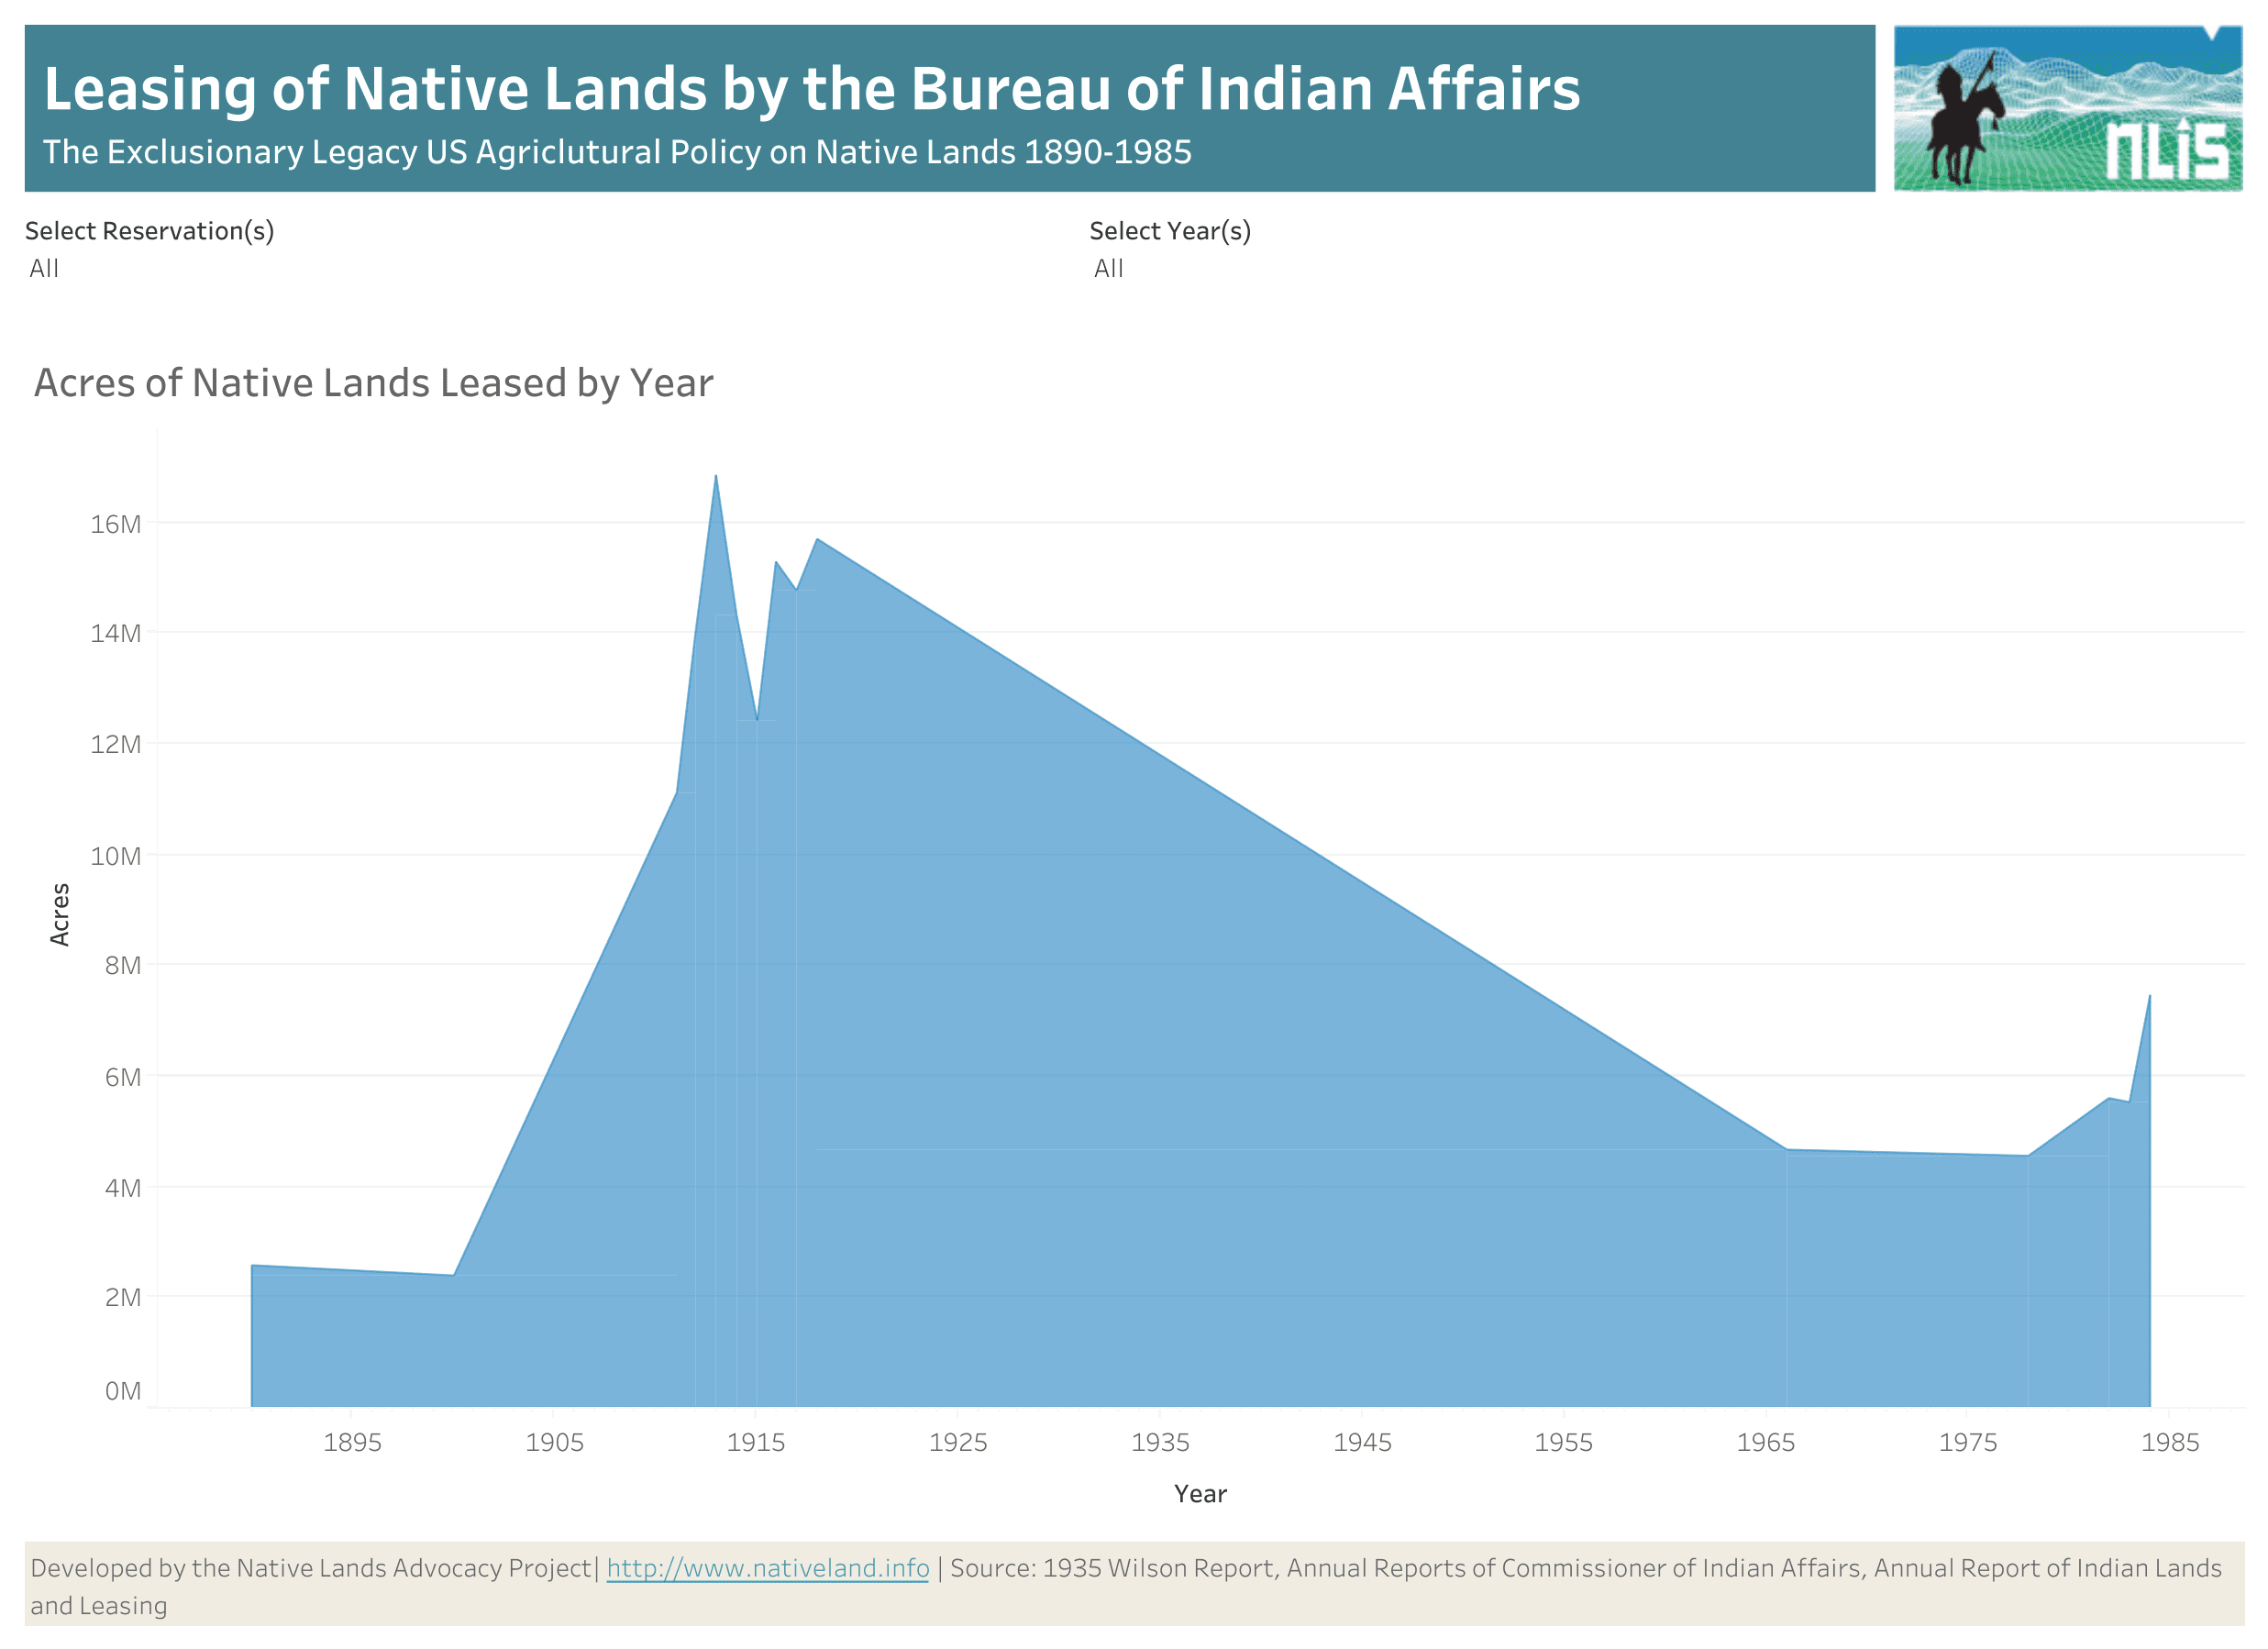 Leasing of Native Lands by the US Bureau of Indian Affairs